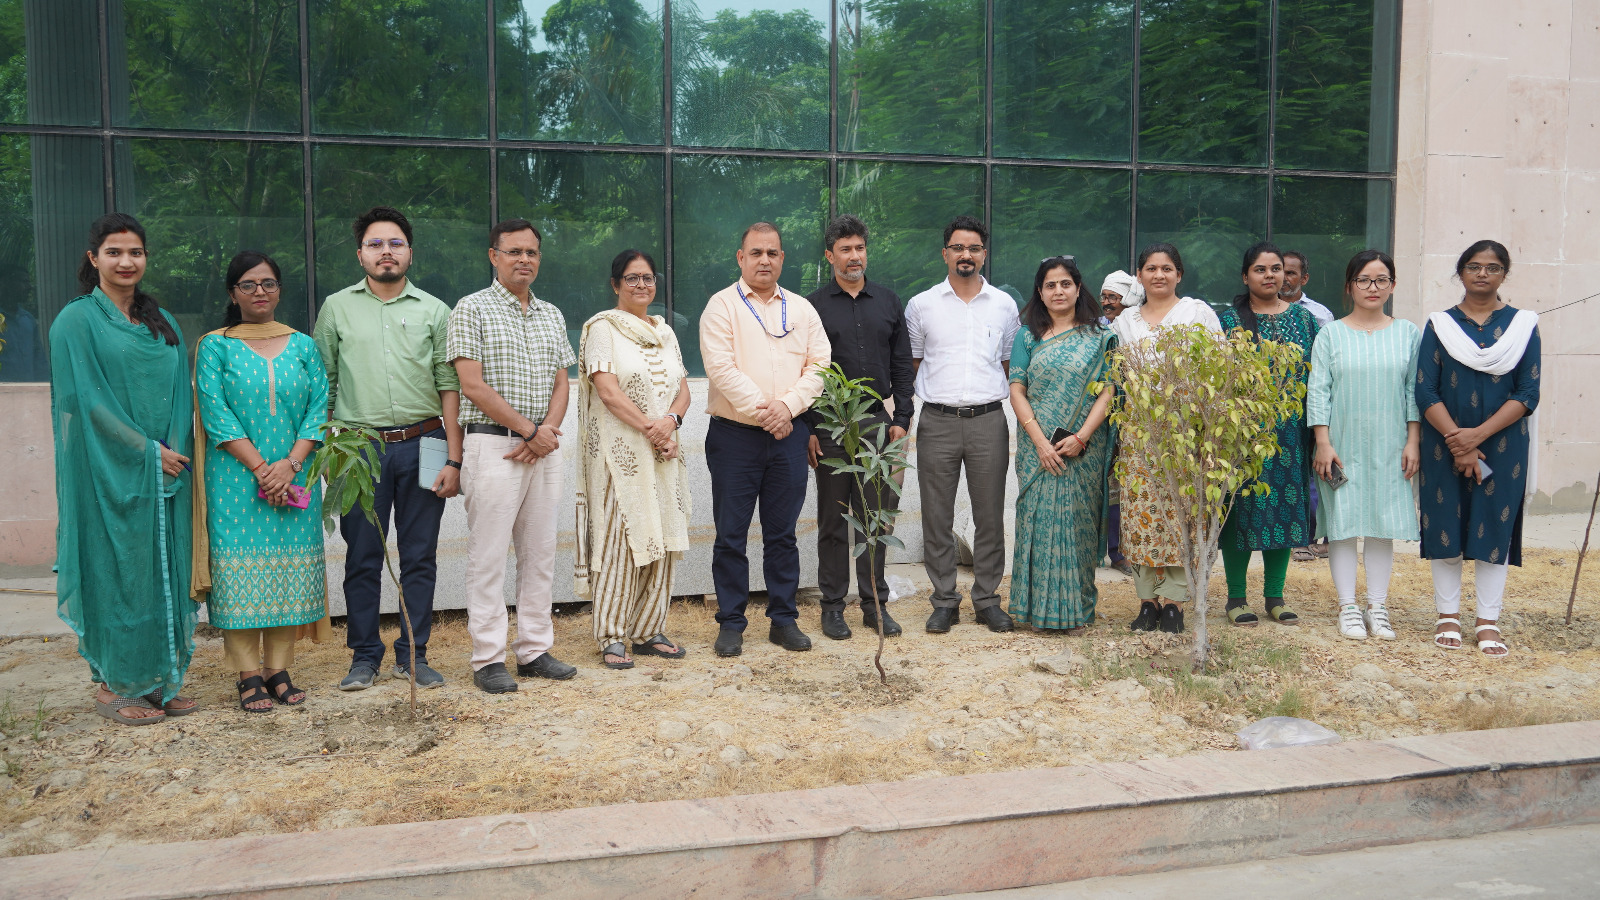 "On the occasion of World Environment Day, let us pledge that we will plant trees together."